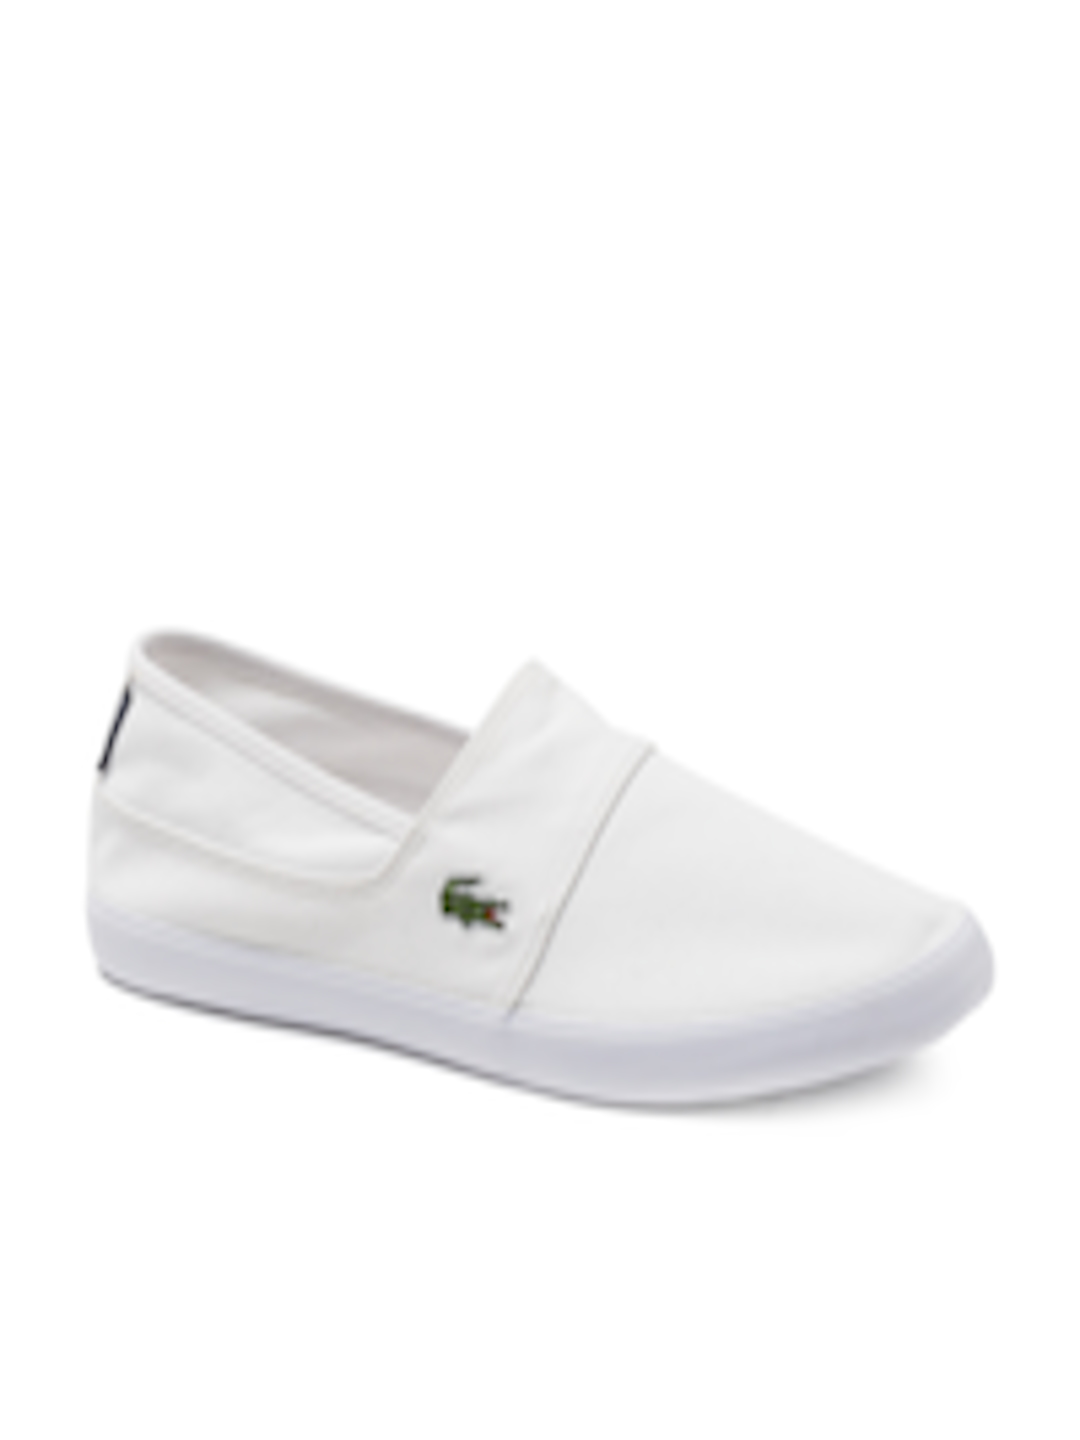 Buy Lacoste Men White Slip On Shoes - Casual Shoes for Men 4304640 | Myntra